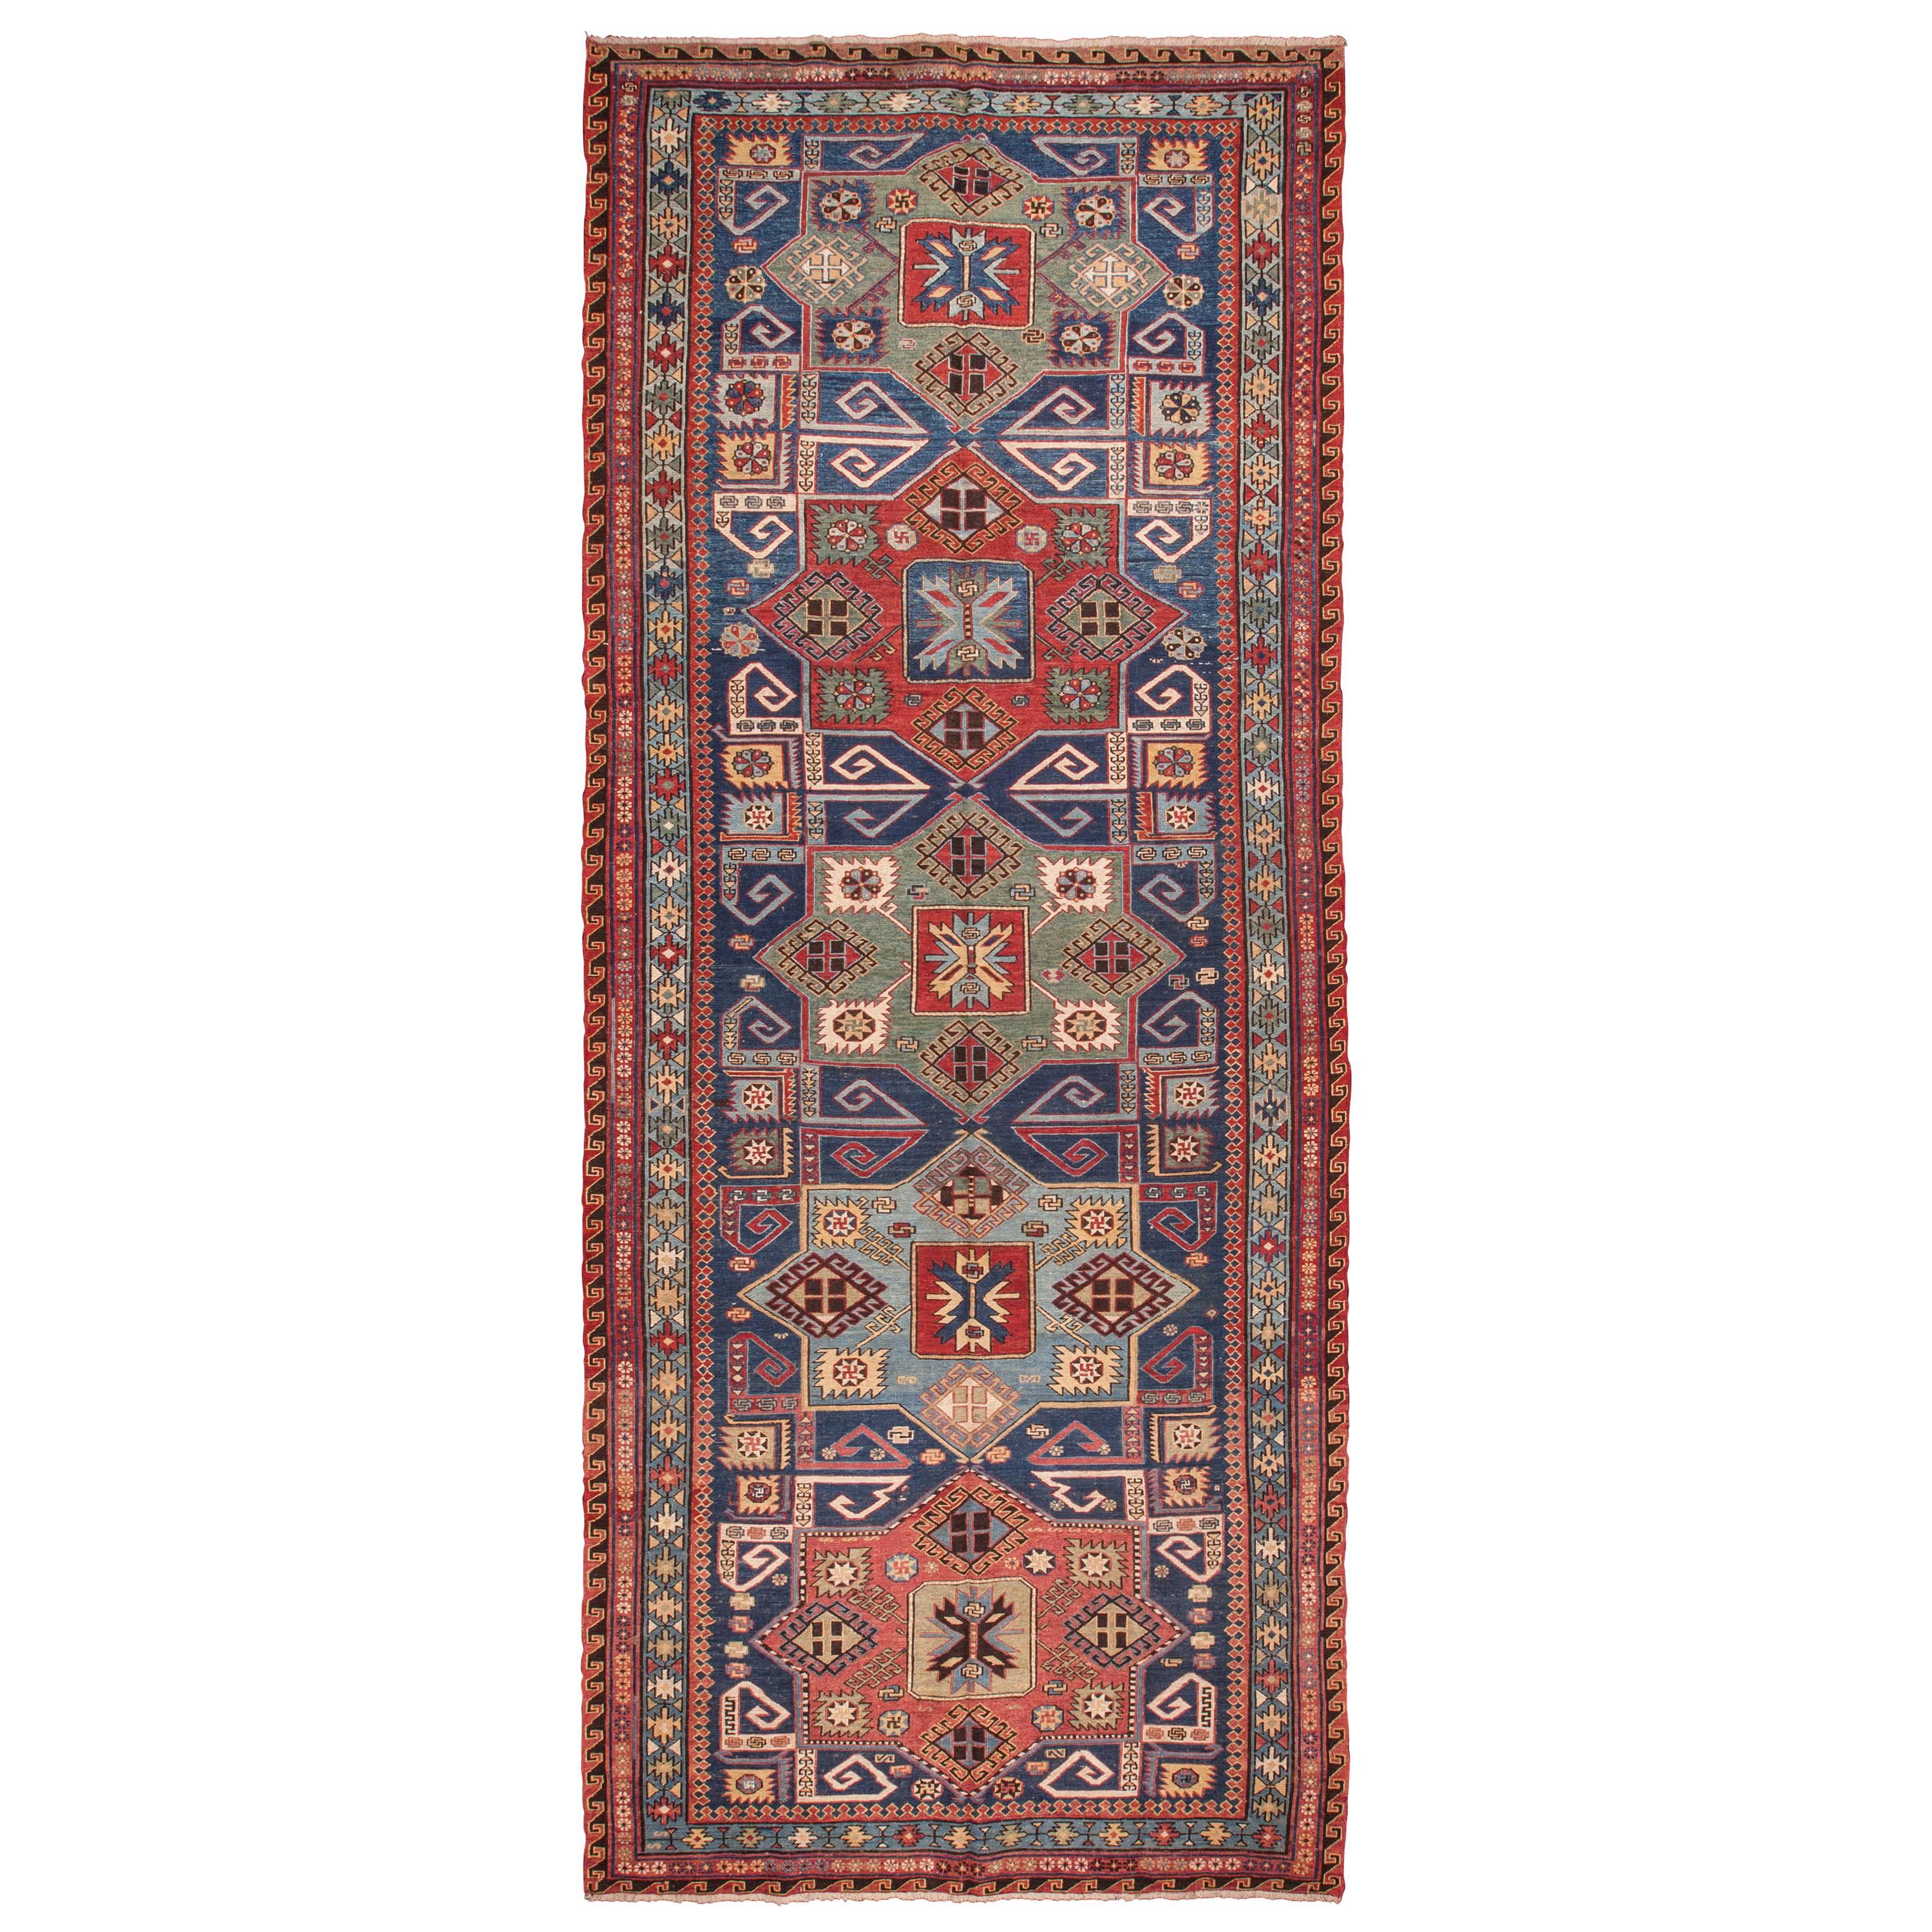 Late 19th to Early 20th Century Caucasian Sumak Rug 5'1'' x 13'0''